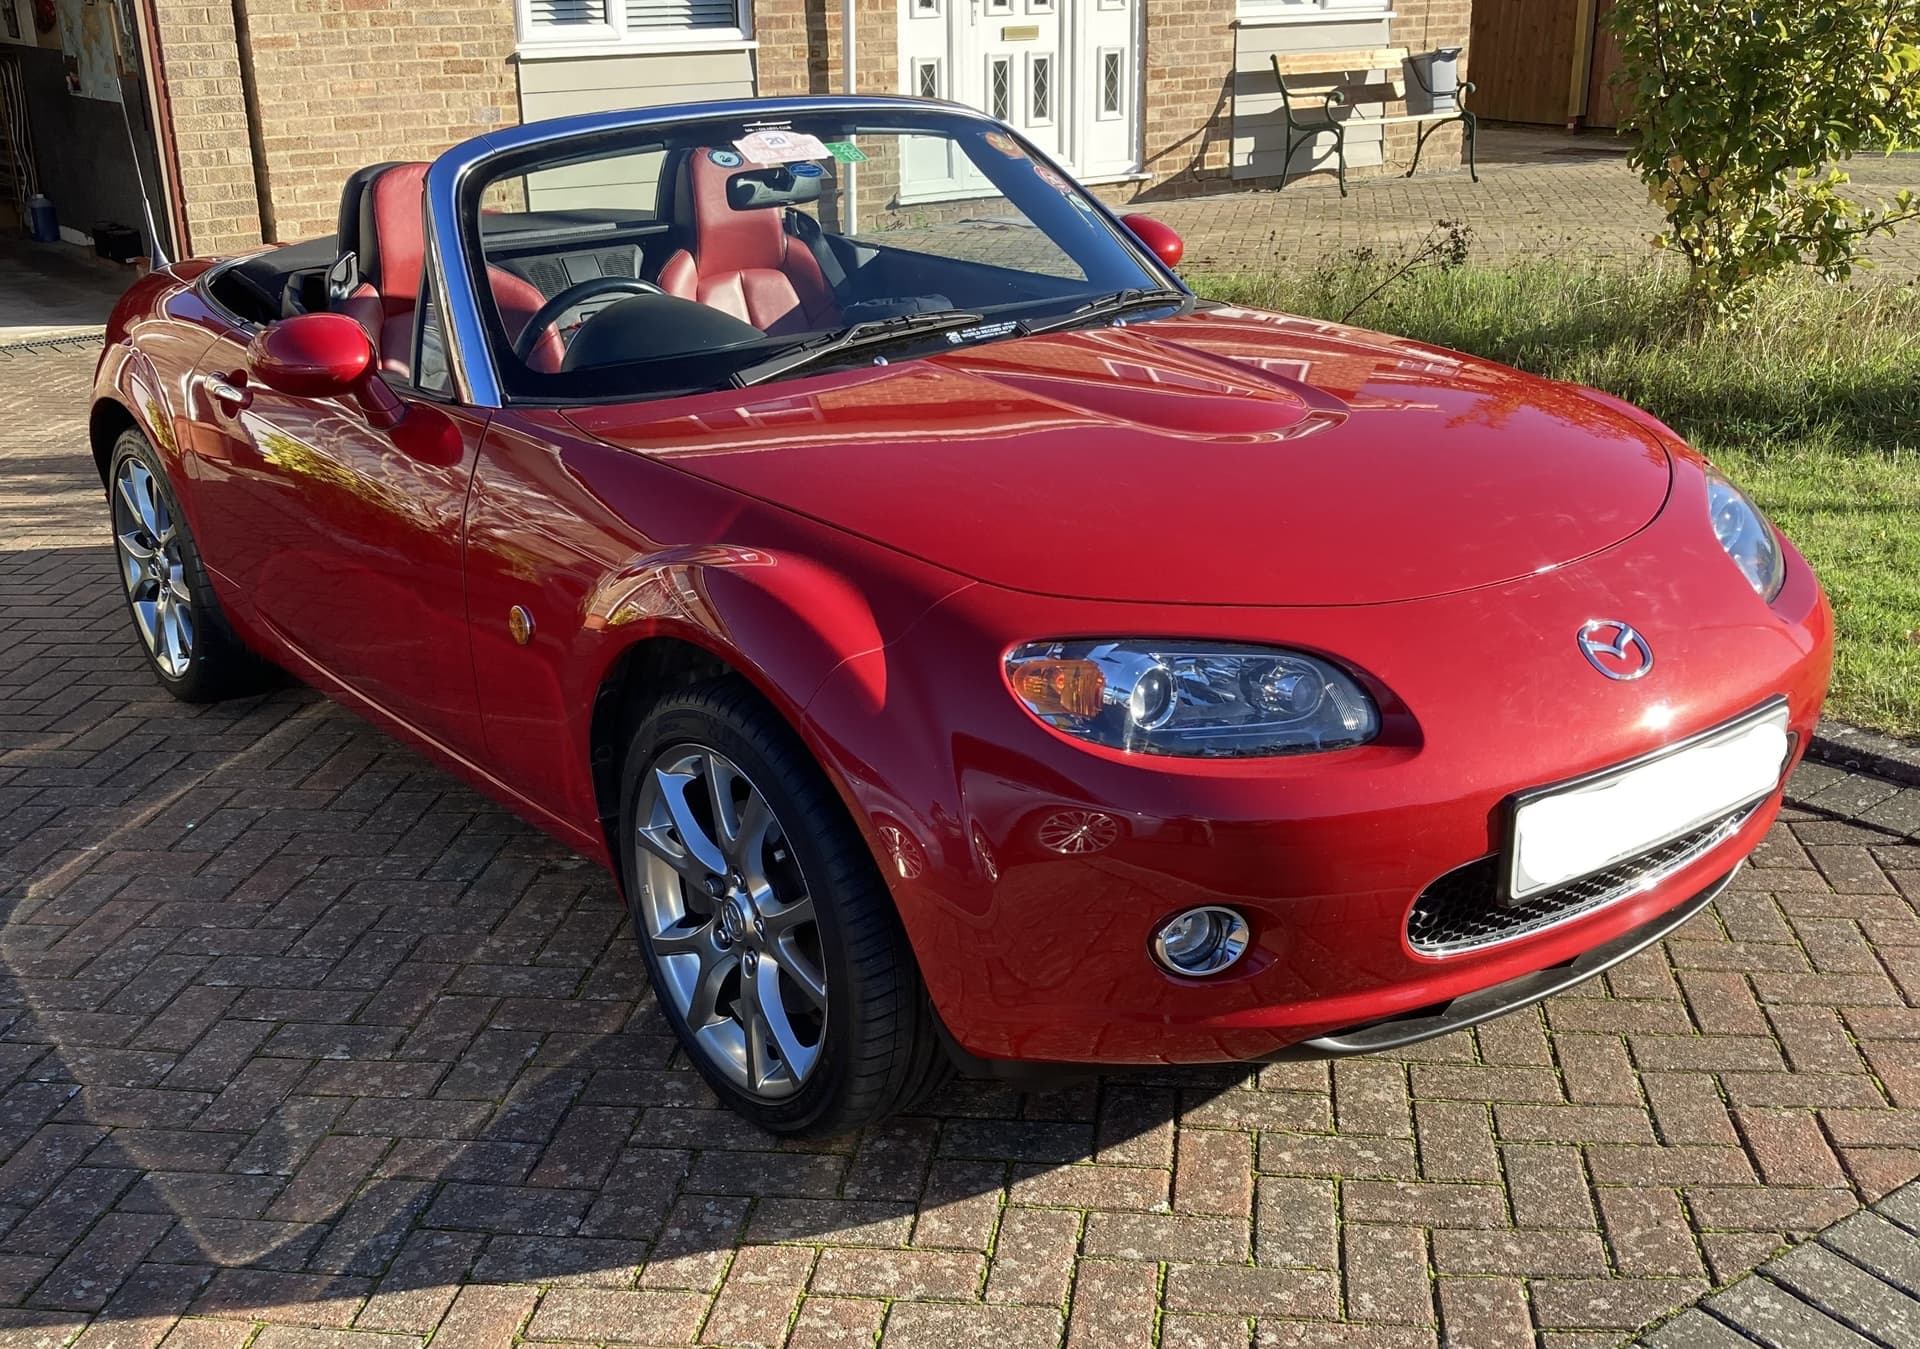 Ekspedient tro Omkostningsprocent 2005 Mazda MX-5 2.0 Third Generation Limited Edition (117/350) Velocity Red  - MX-5s & Roadsters For Sale - MX-5 Owners Club Forum